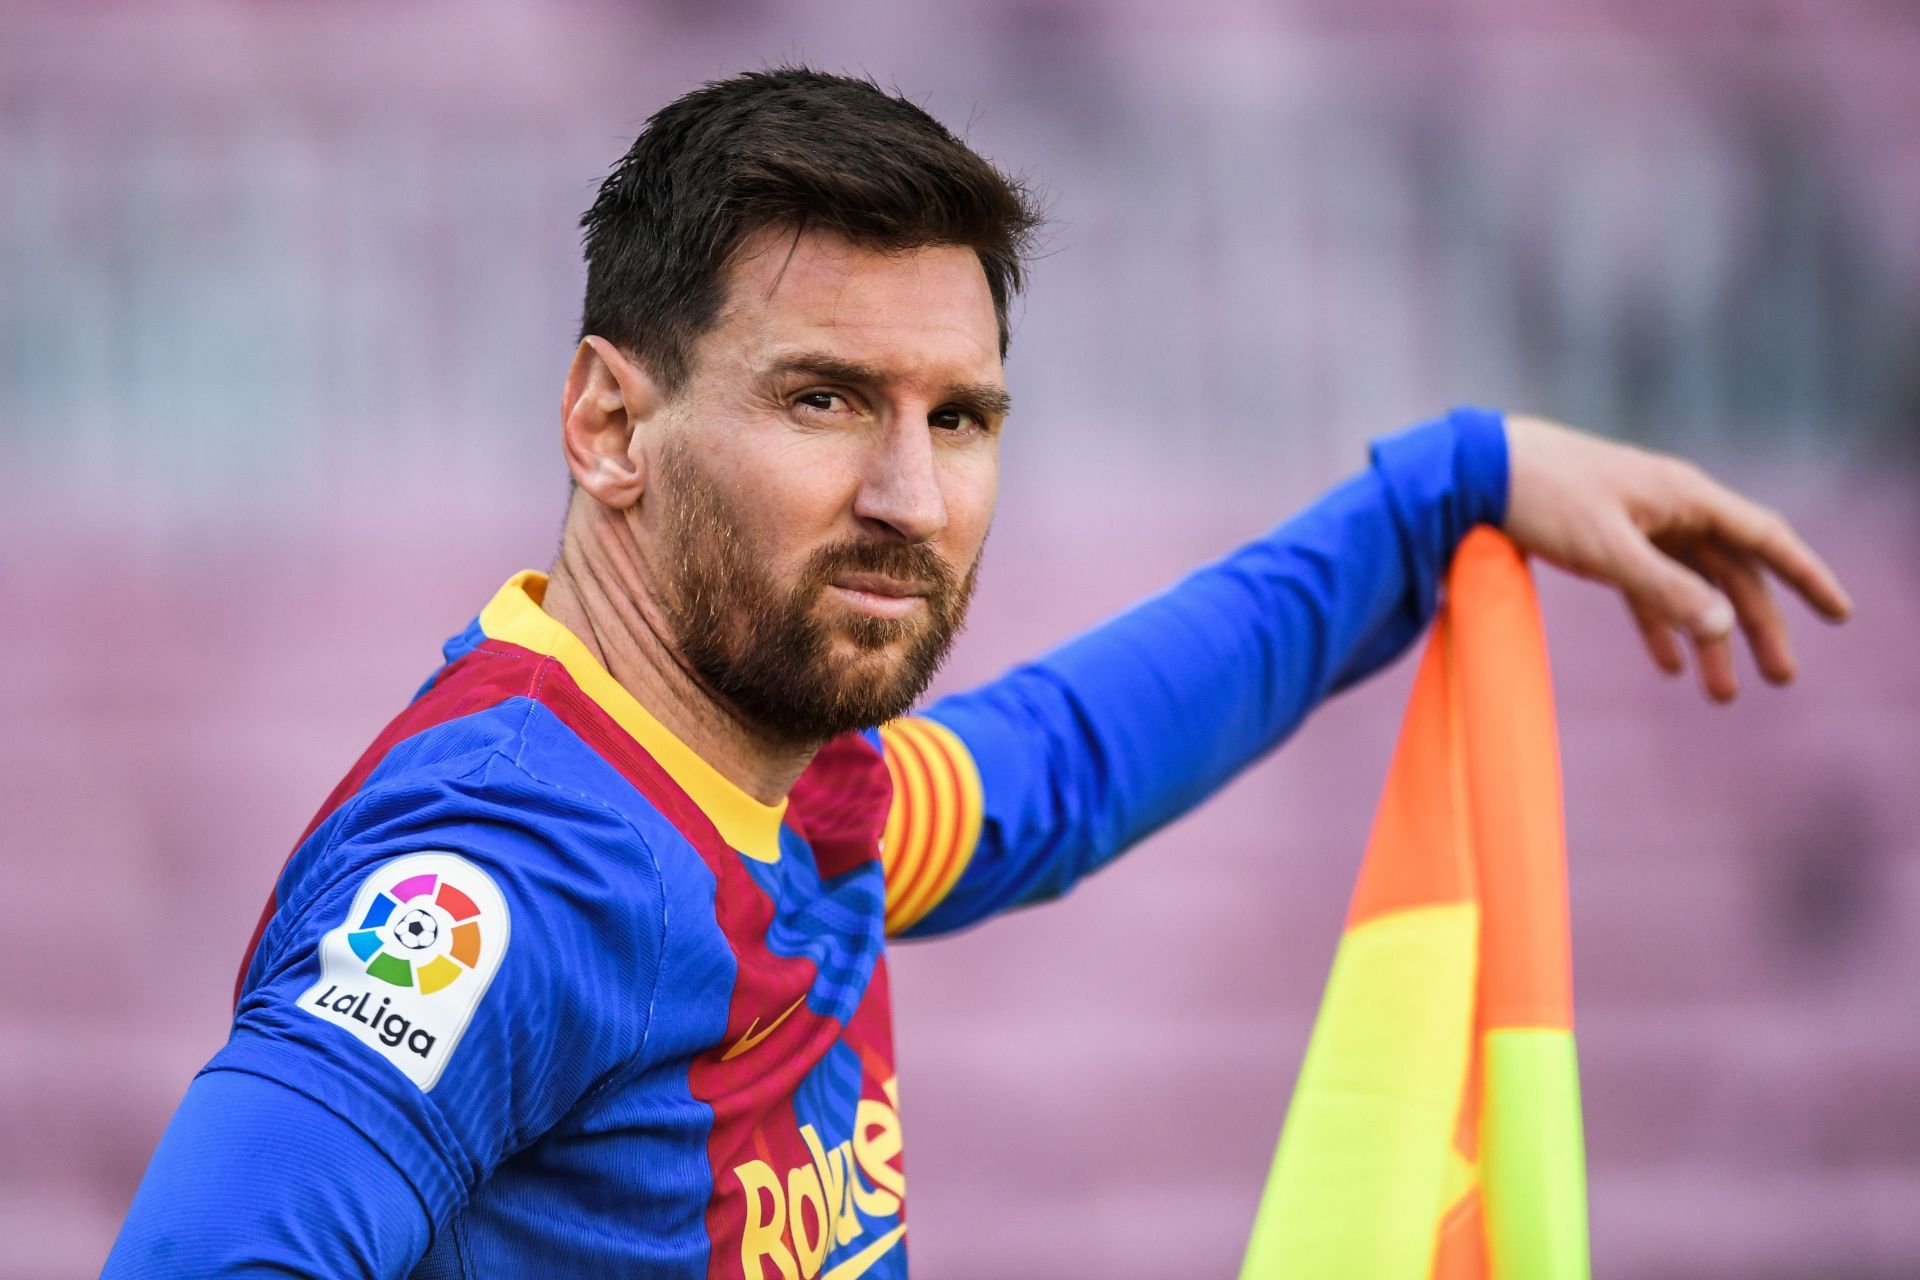 A return for Lionel Messi in January is difficult